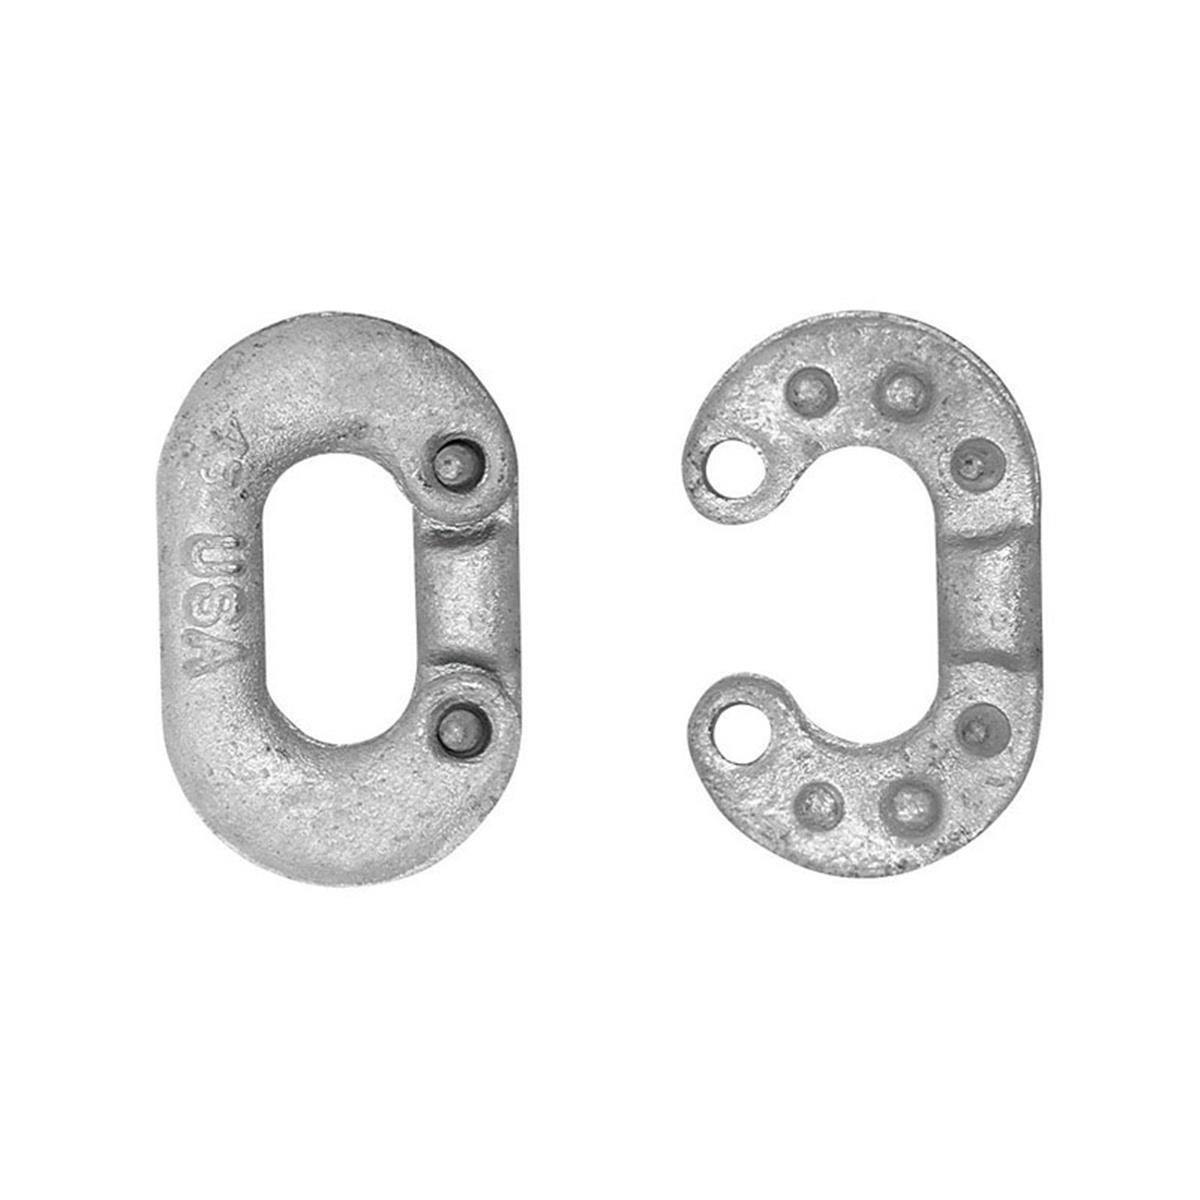 Picture of Apex Tool Group 5200634 0.37 in. Galvanized Steel Connecting Link- pack of 10